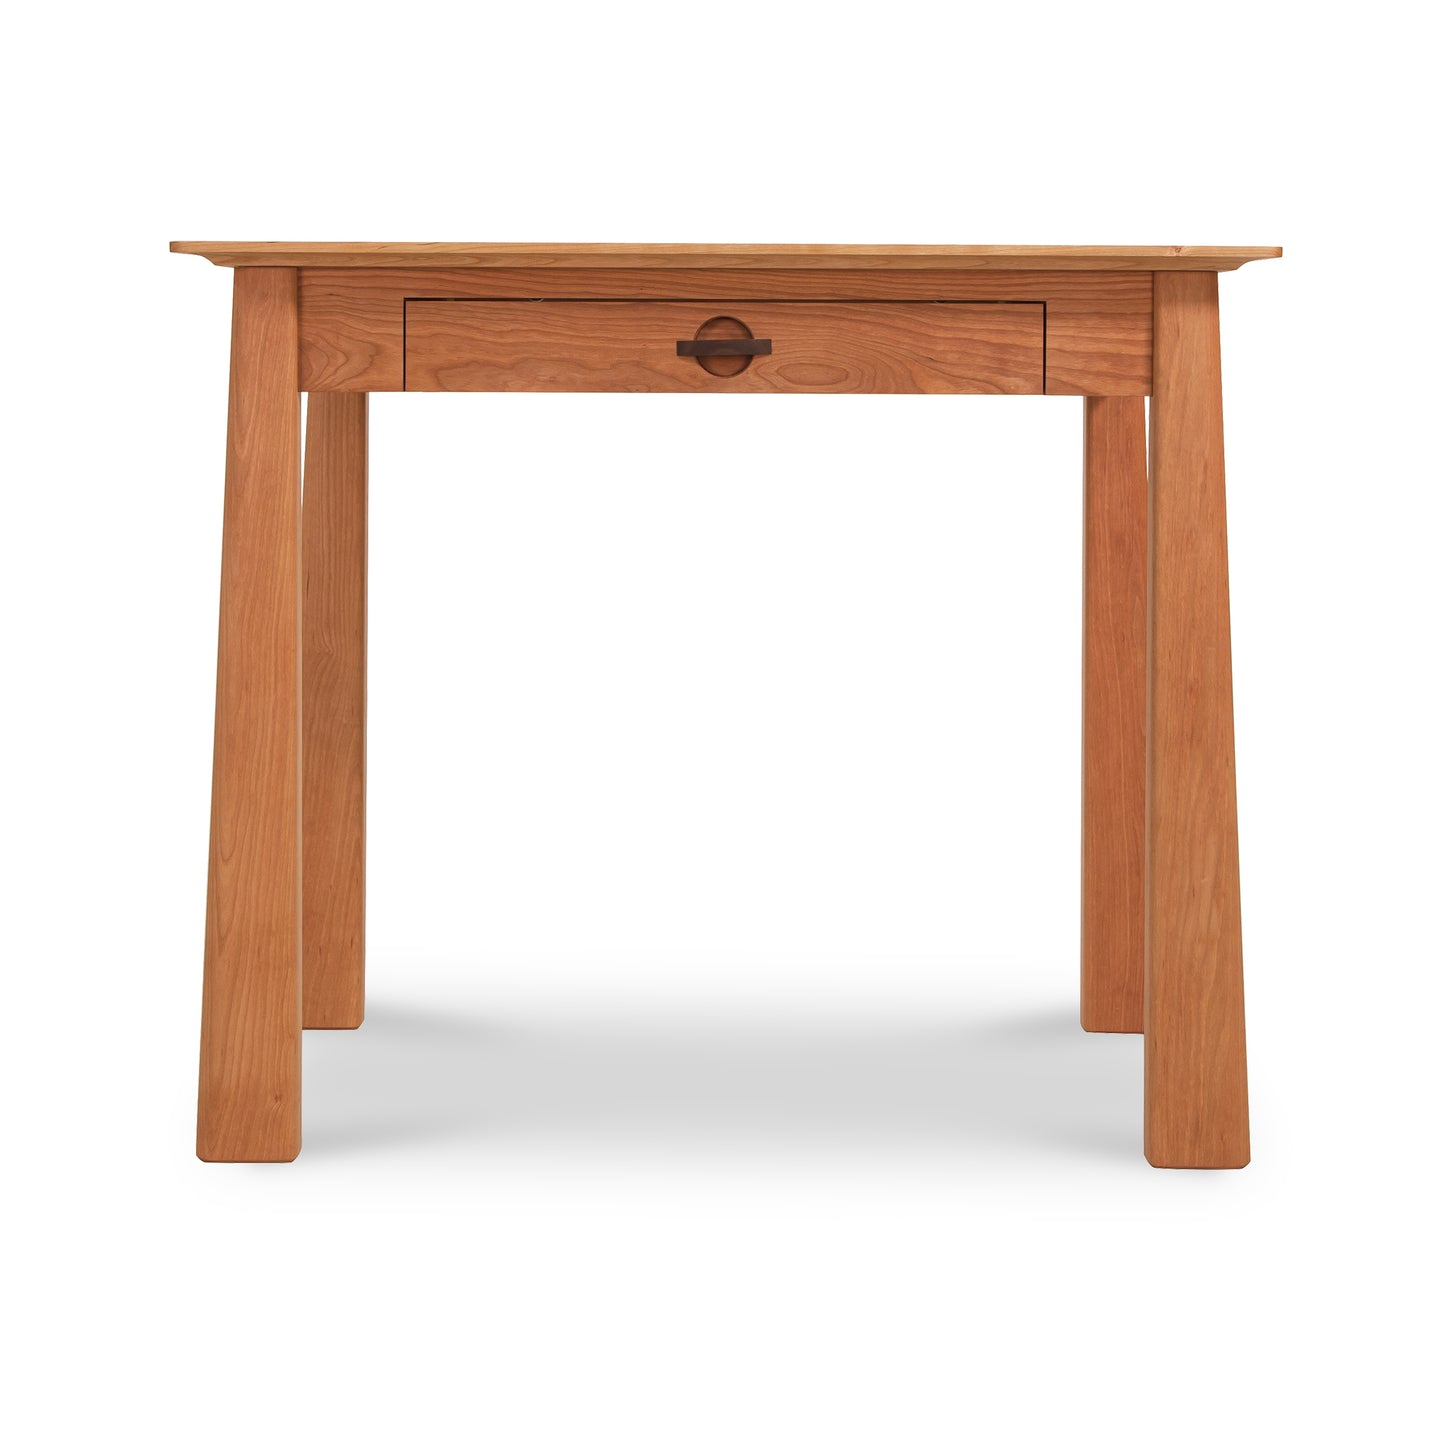 A Maple Corner Woodworks Cherry Moon Writing Desk, with a single drawer, against a white background.